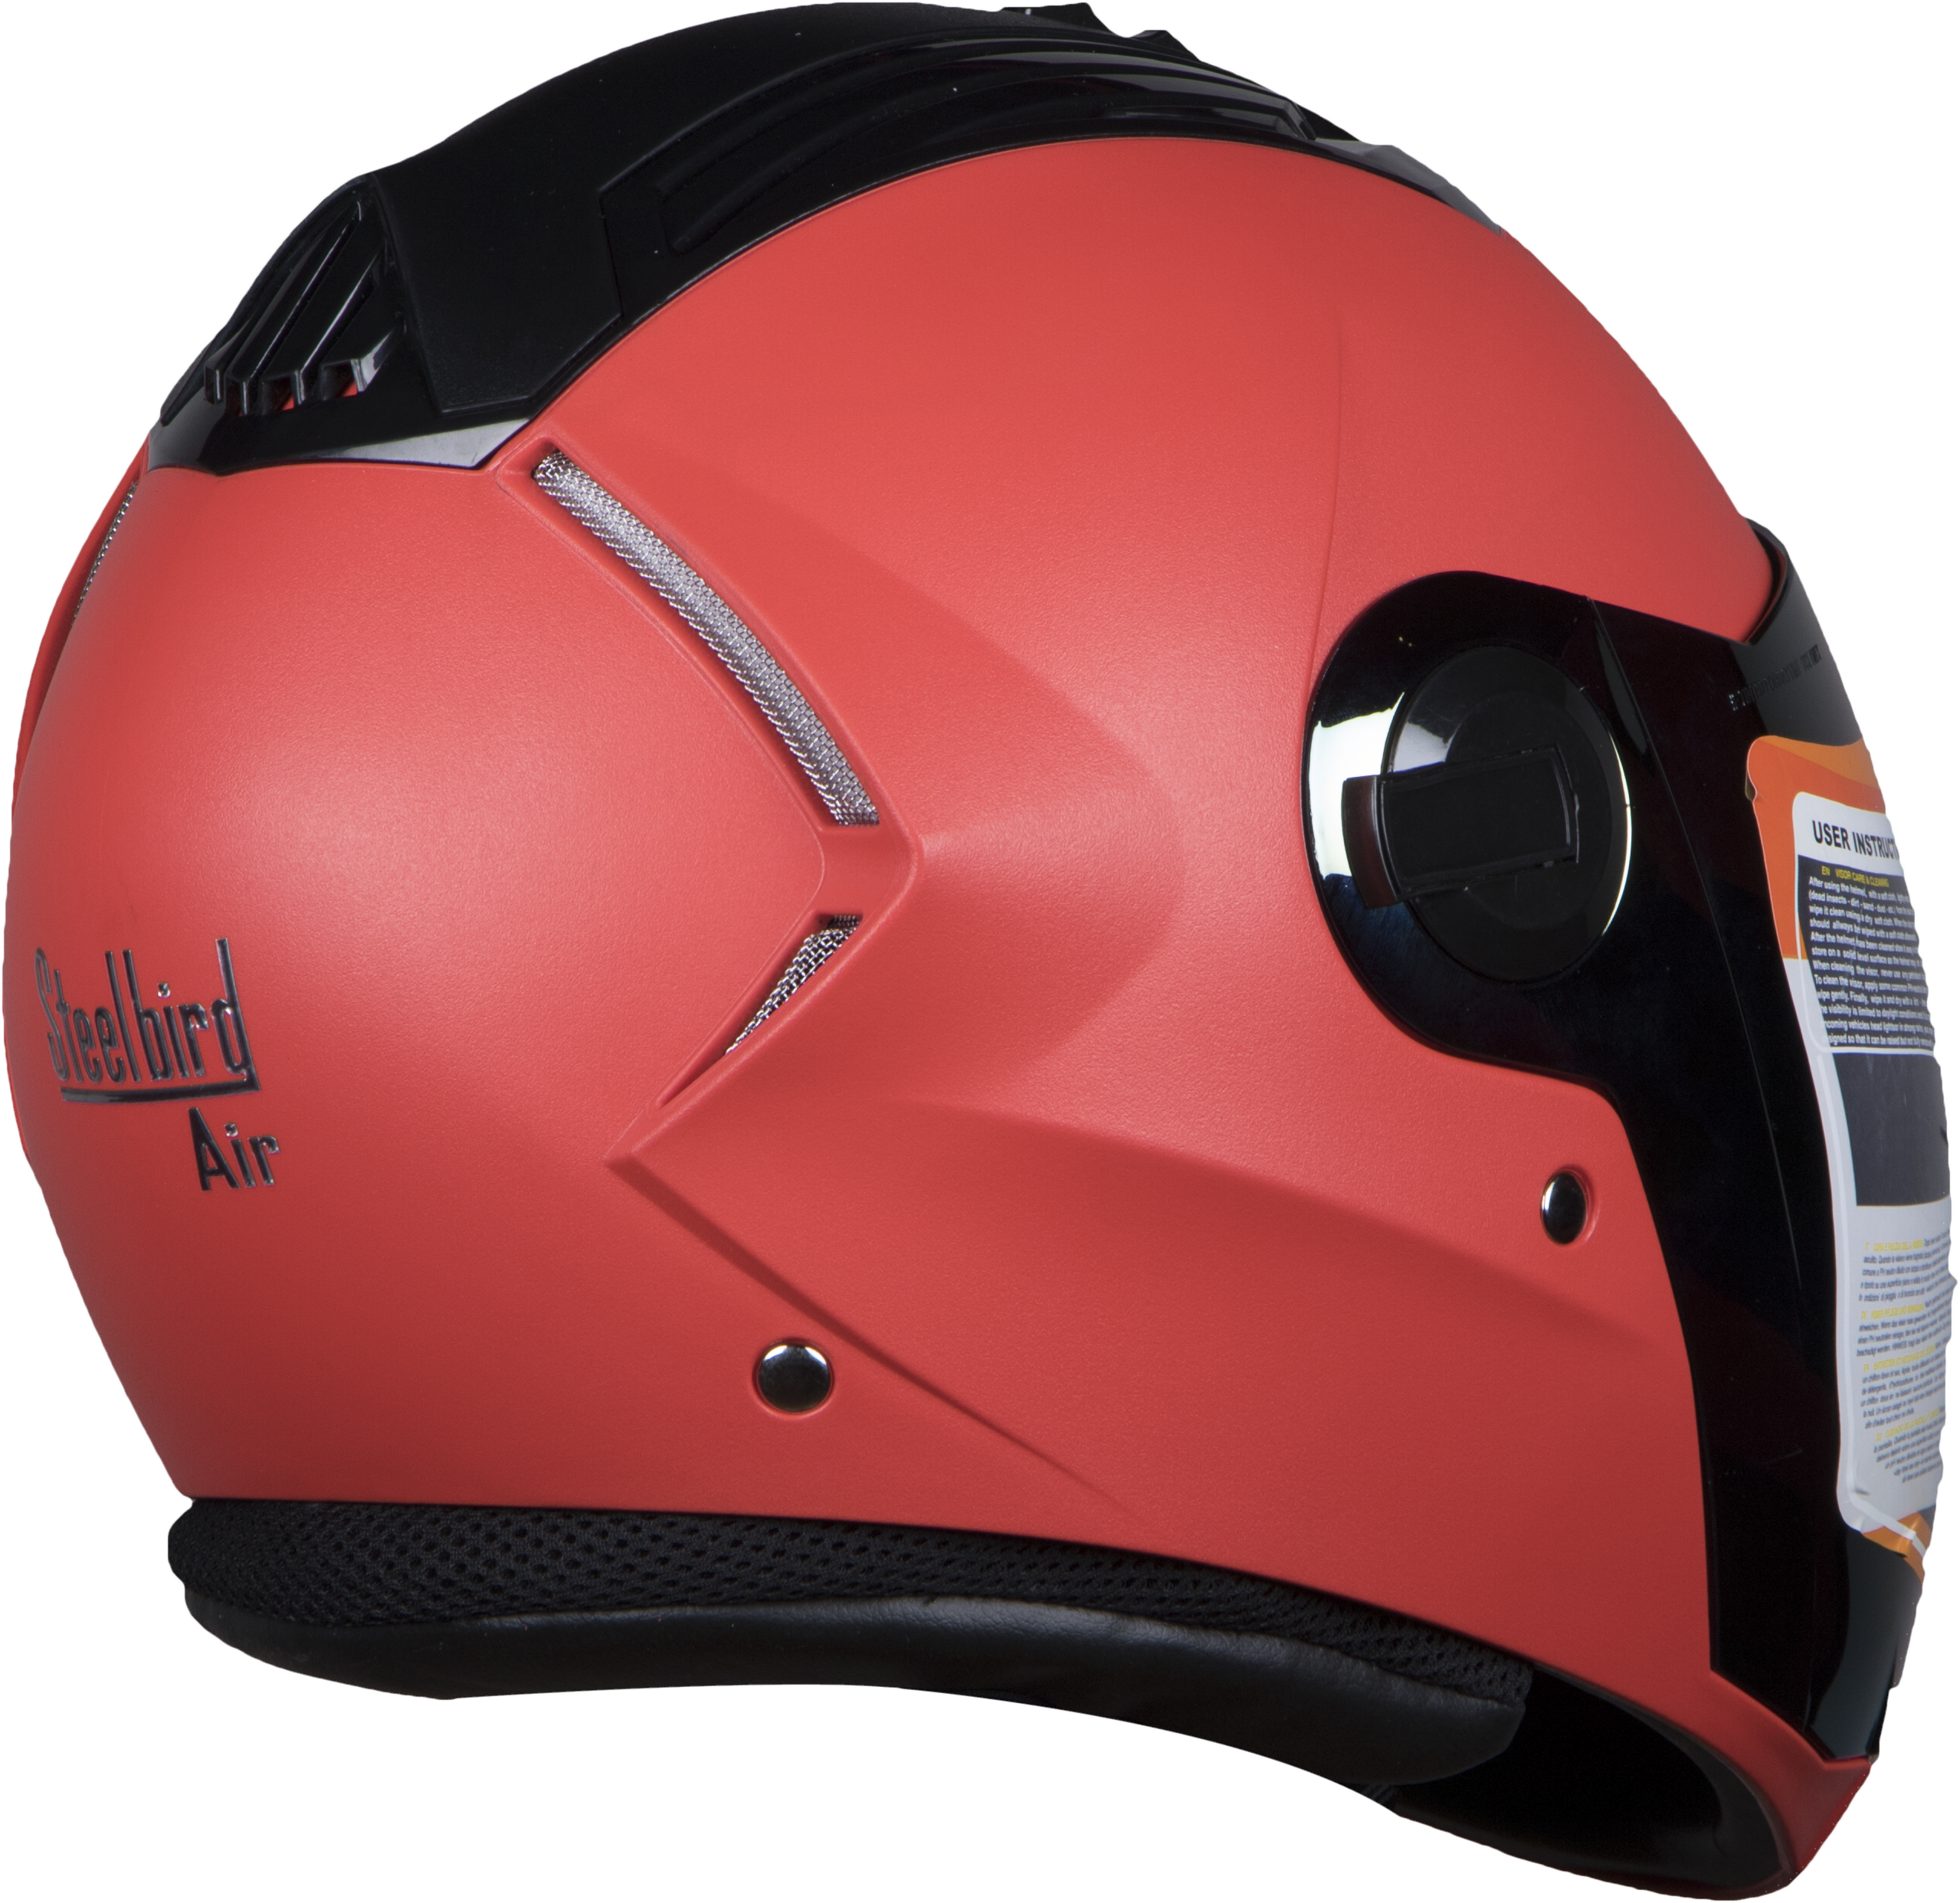 SBA-2 DASHING RED ( FITTED WITH CLEAR VISOR EXTRA RAINBOW CHROME VISOR FREE)